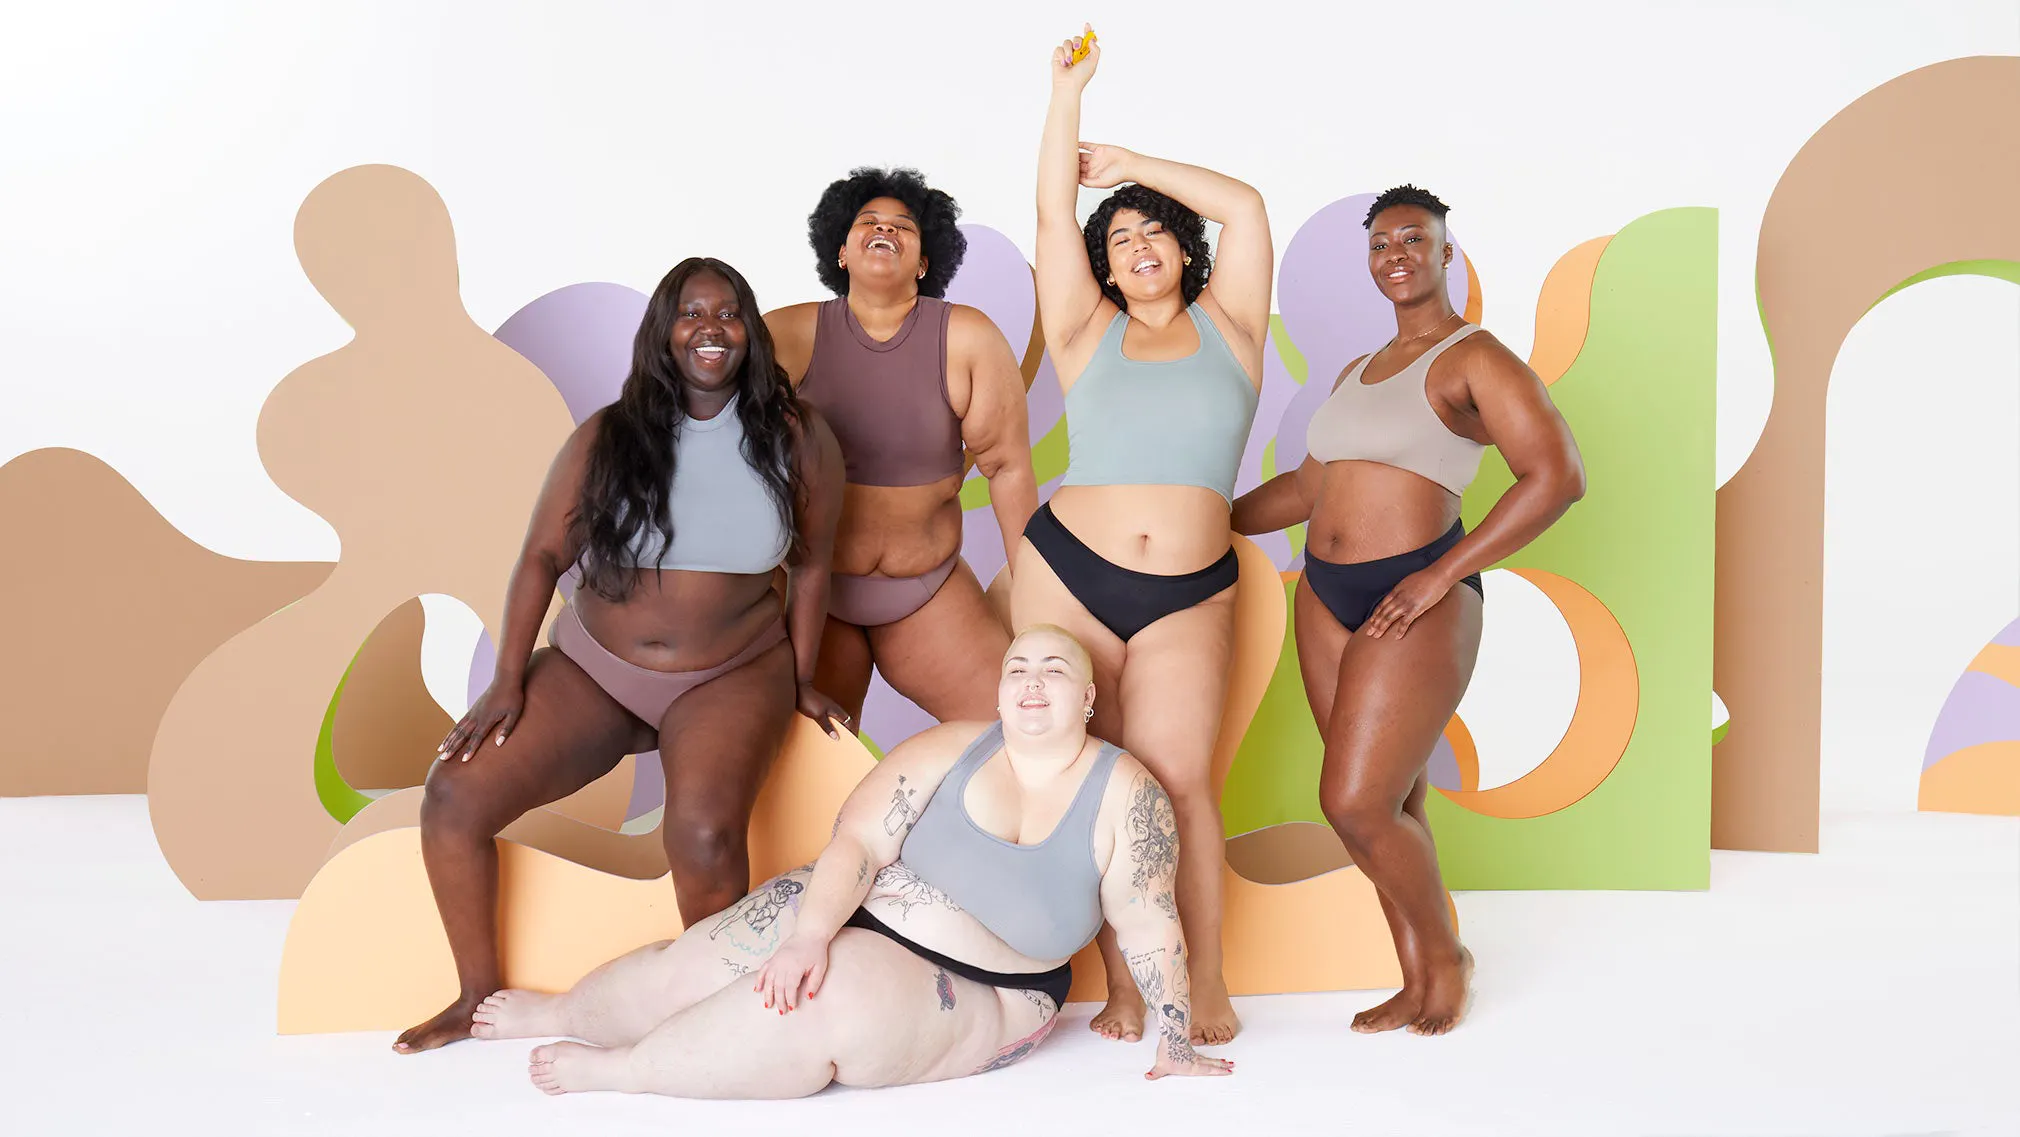 Plus size period proof undies: Fashion brand hailed for launching  'marvellous' pants that women of all sizes 'need